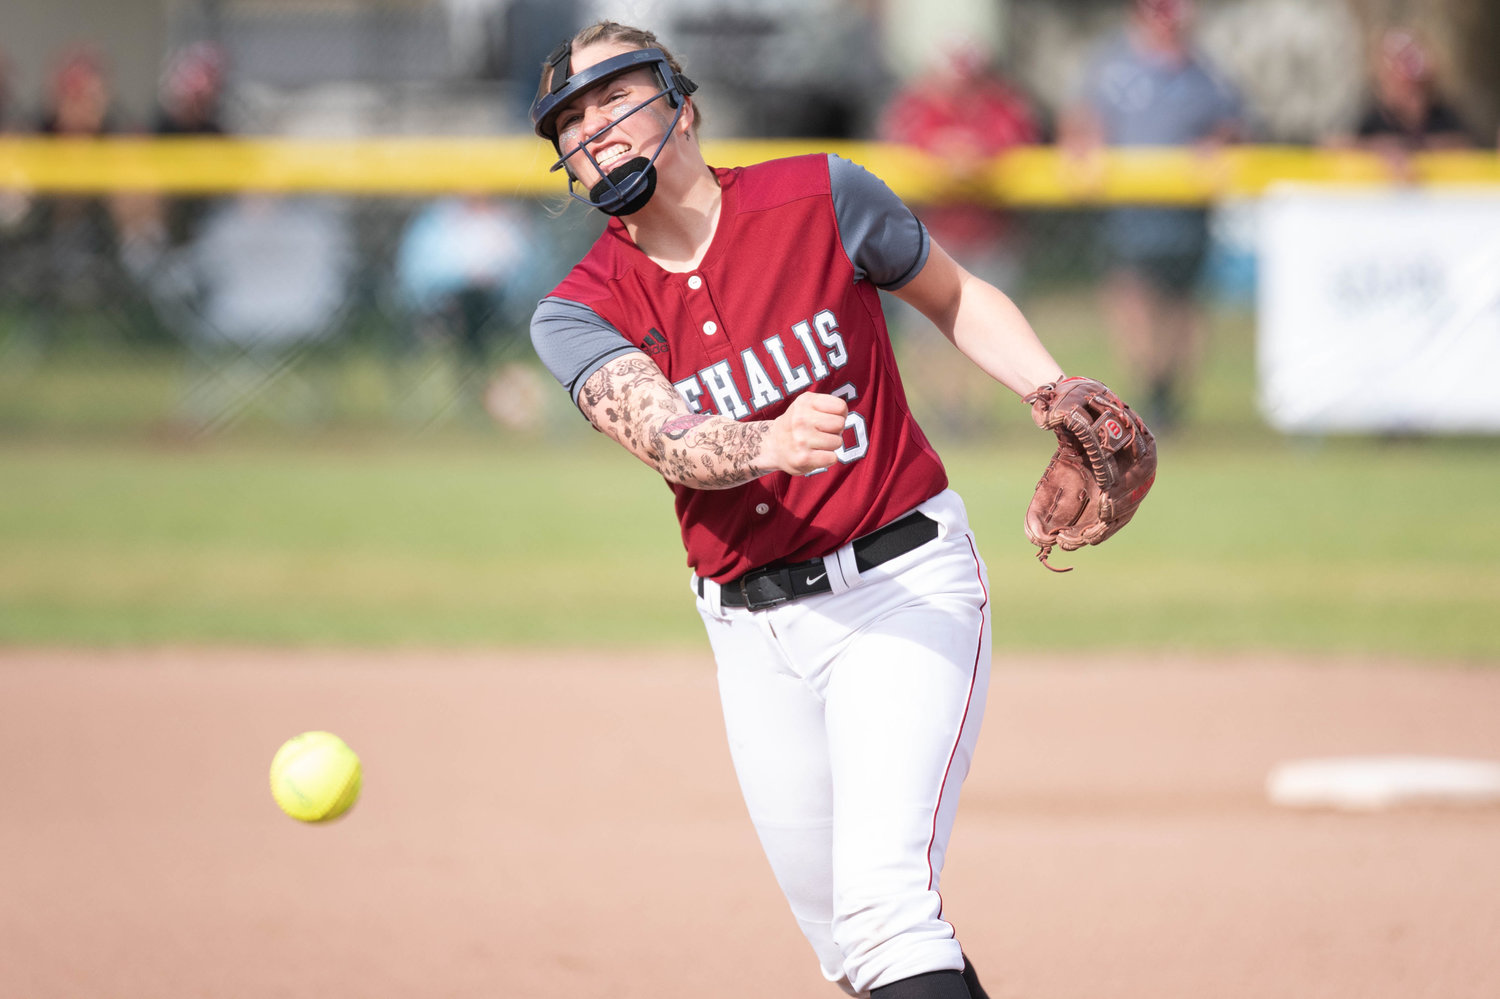 W.F. west pitcher Kamy Dacus delivers a pitch against Olympic in the 2A State Quarterfinals at Carlon Park in Selah May 27.